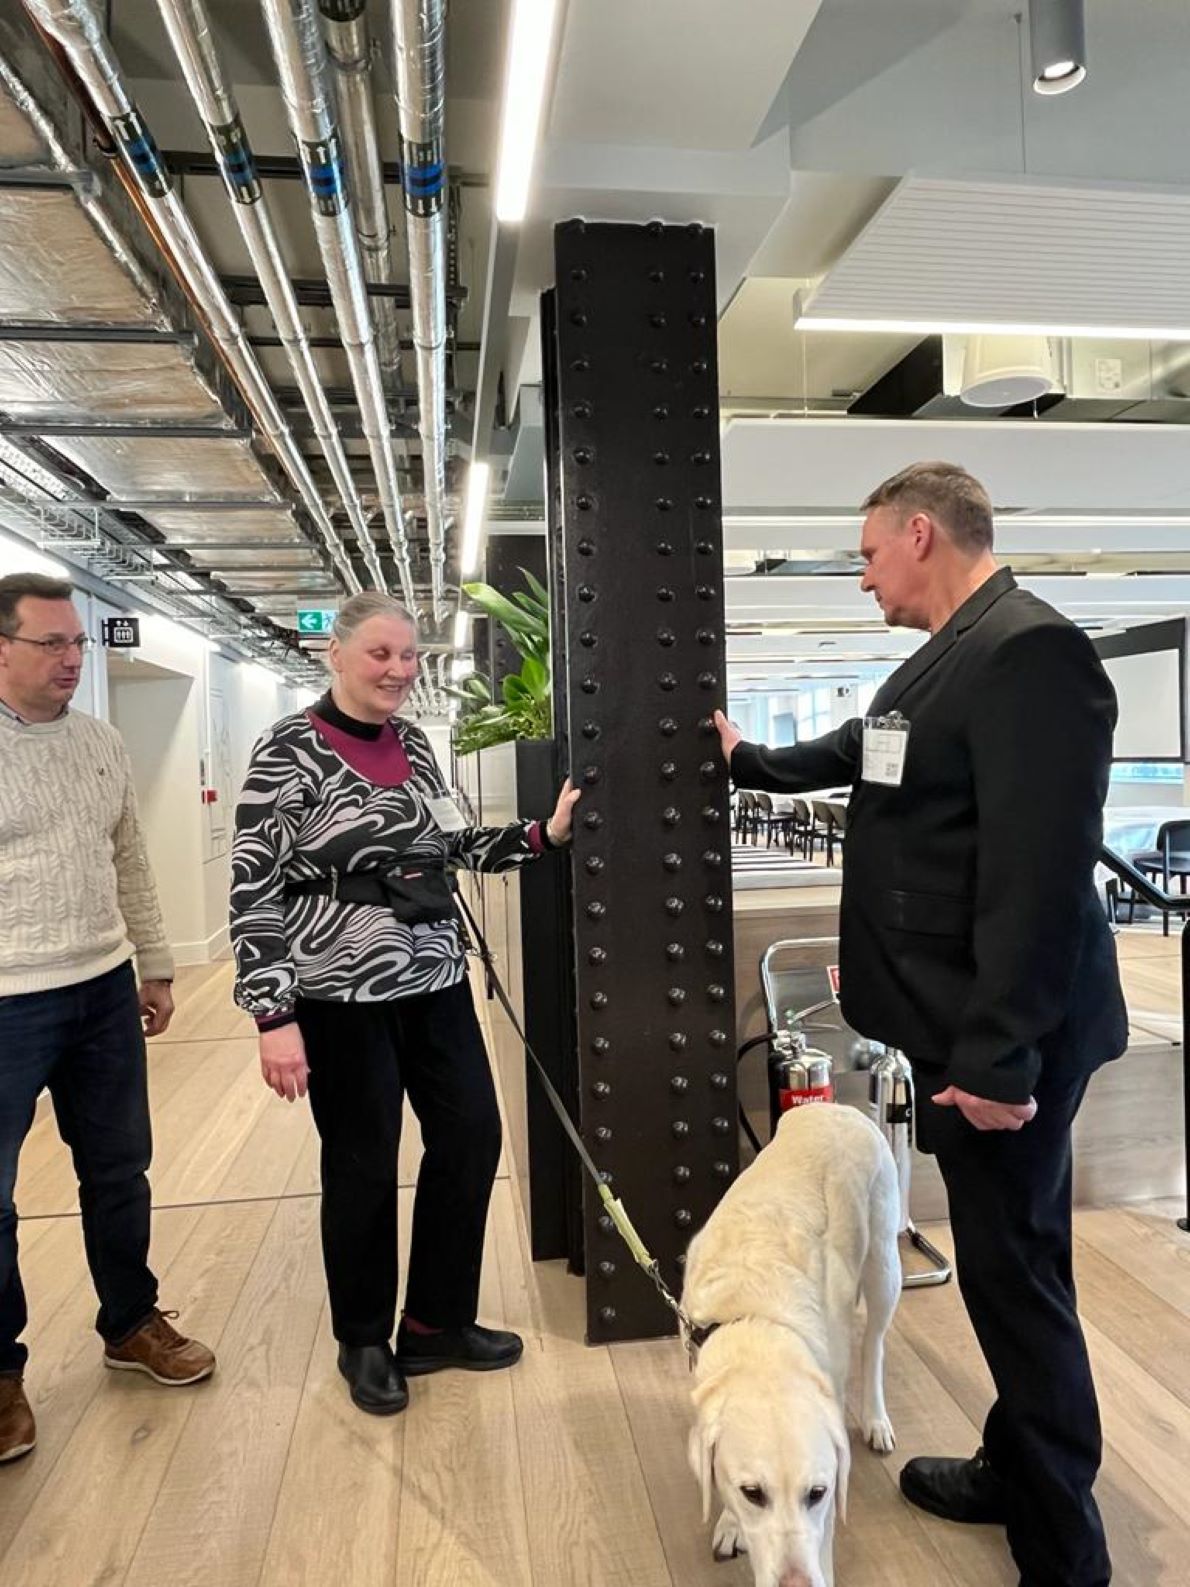 Image shows John (left) welcoming Johnathan, Mary and her guide dog Lewis (right) to the new PageGroup head office. They are all stood in a large open plan area, with a girder in between which Johnathan and Mary are touching with their hands